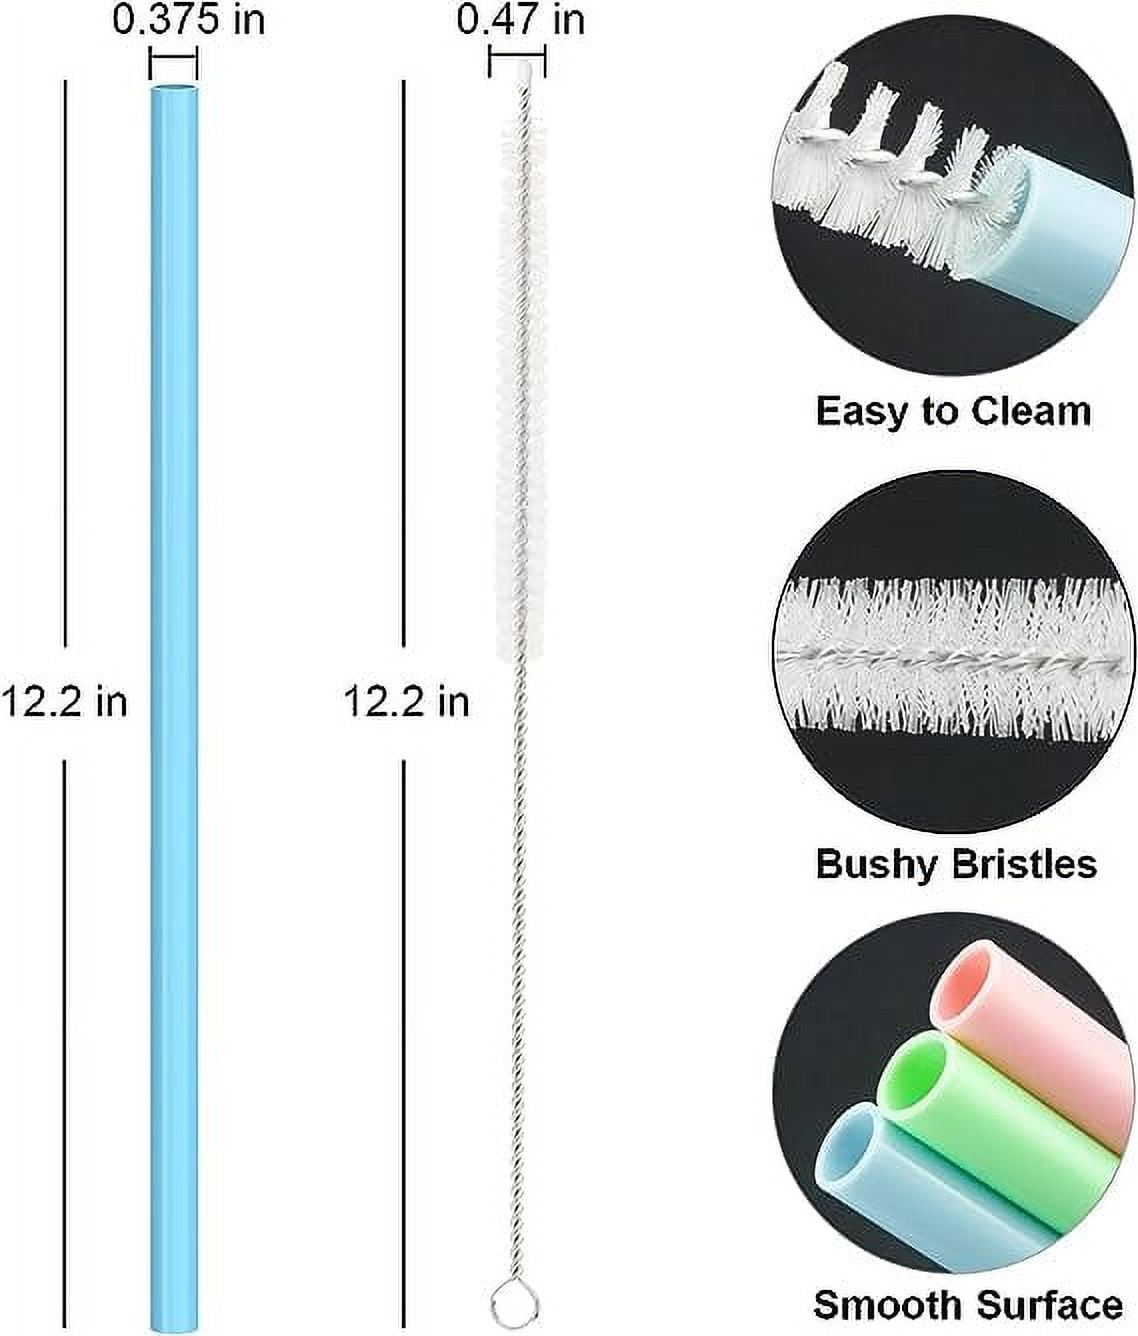 Silicone Straw Replacement for Stanley 40 oz 30 oz Tumbler Cup, 6 Pack  Reusable Straws with Cleaning Brush for Stanley Adventure Quencher Travel  Tumbler, Straw for Stanley Accessories 